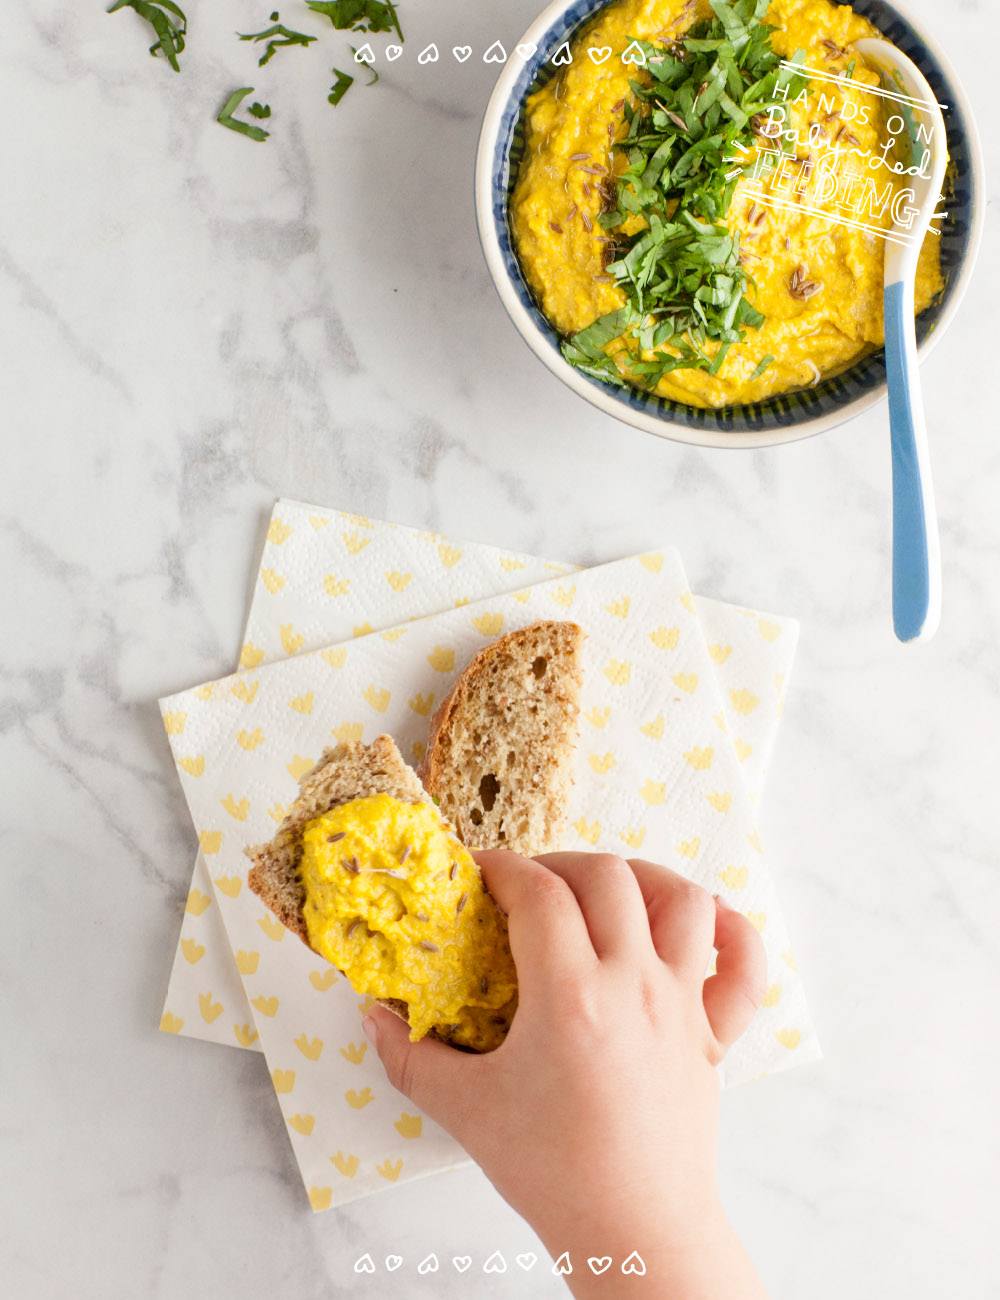 Healthy Baby Friendly Curried Hummus from Baby Led Feeding dip and sauces recipe Long recipe image with baby hand and hummus from the best selling author Aileen Cox Blundell. Homemade healthy baby sauce and dip.